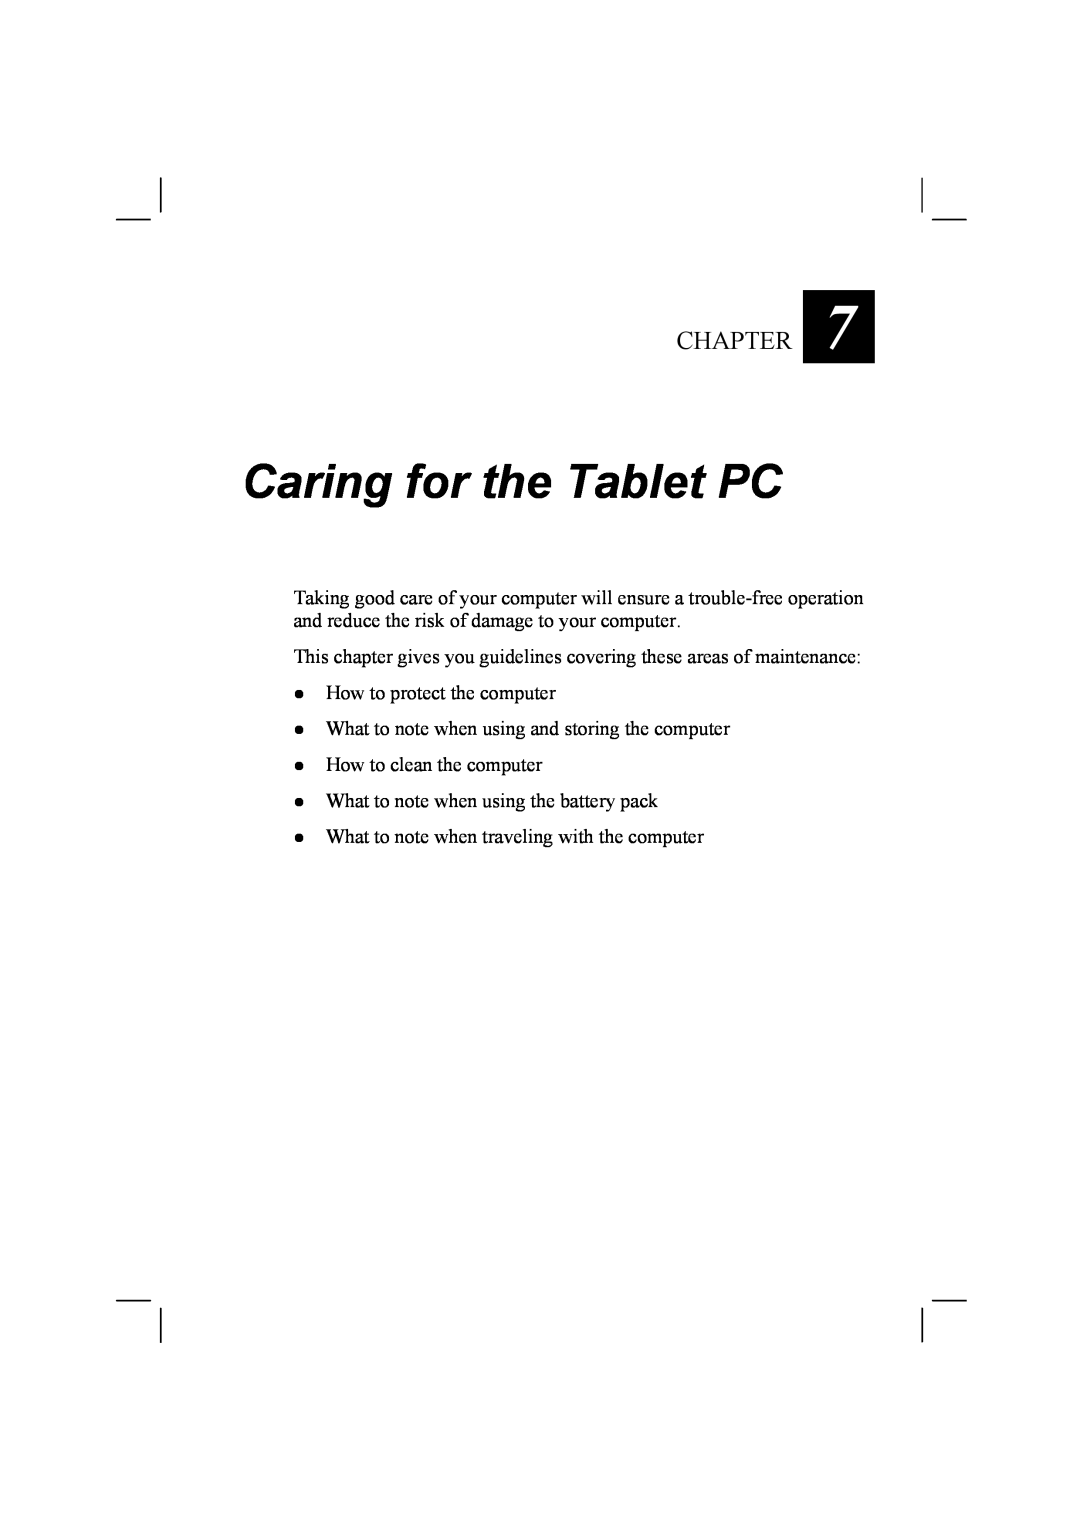 TAG 20 Series manual Caring for the Tablet PC, Chapter 